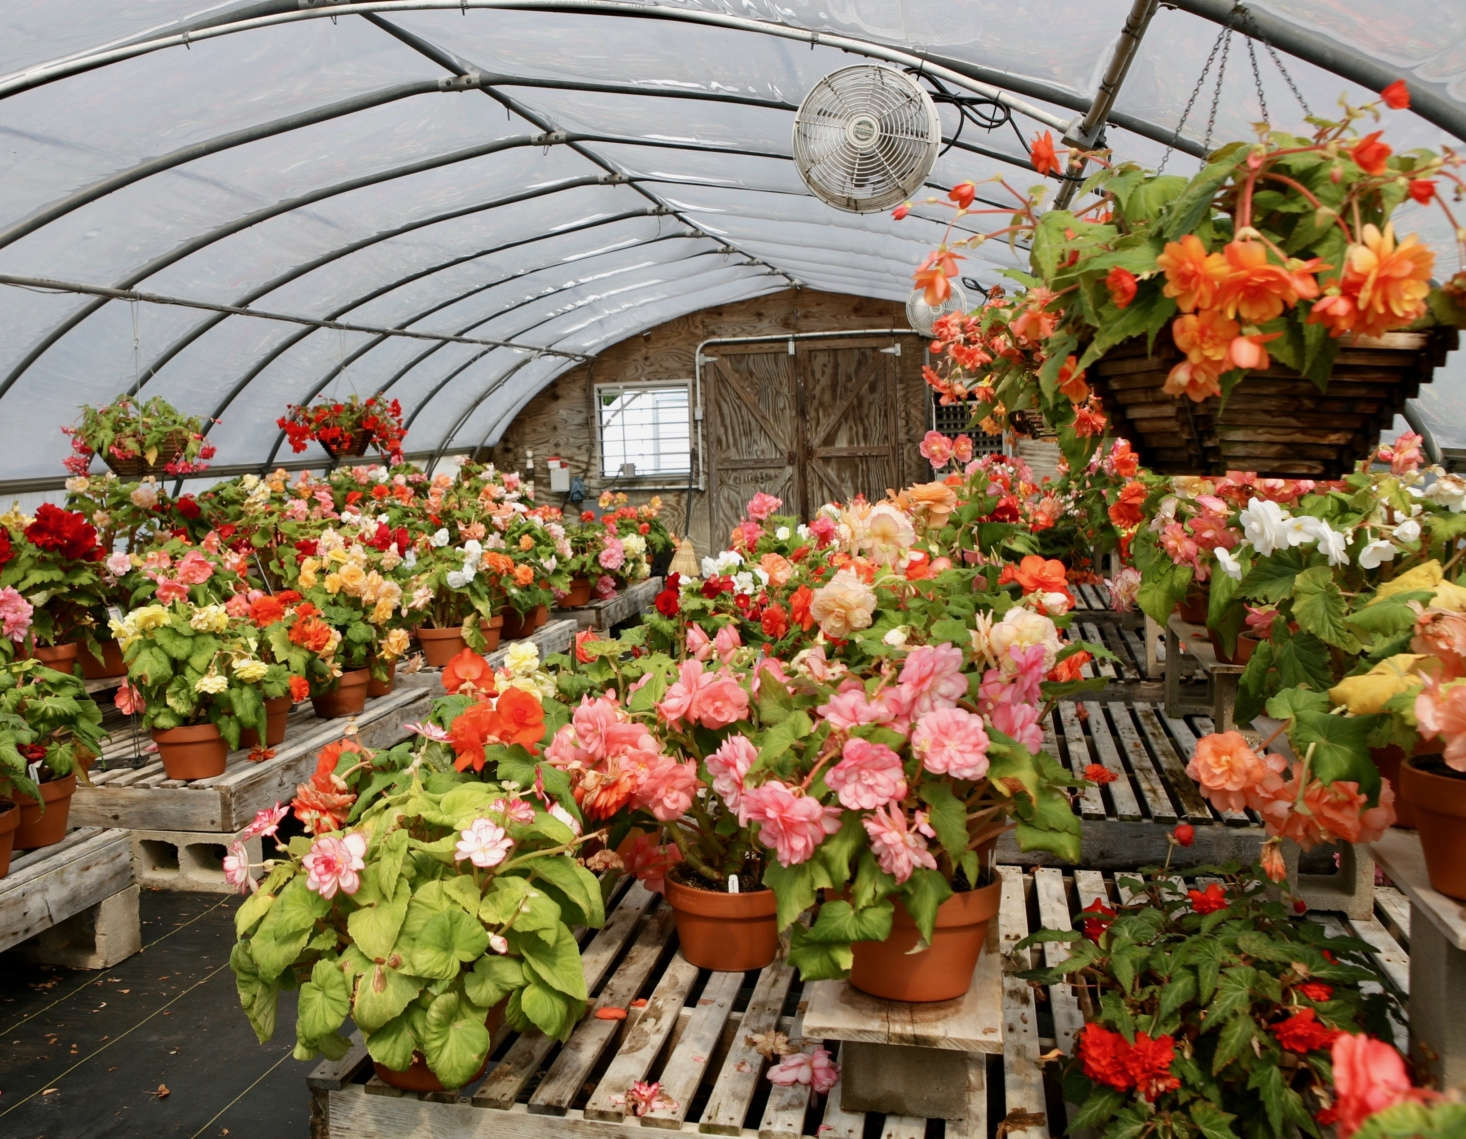 Begonias under propagation at White Flower Farm. See growing tips for begonias in Gardening data-src=